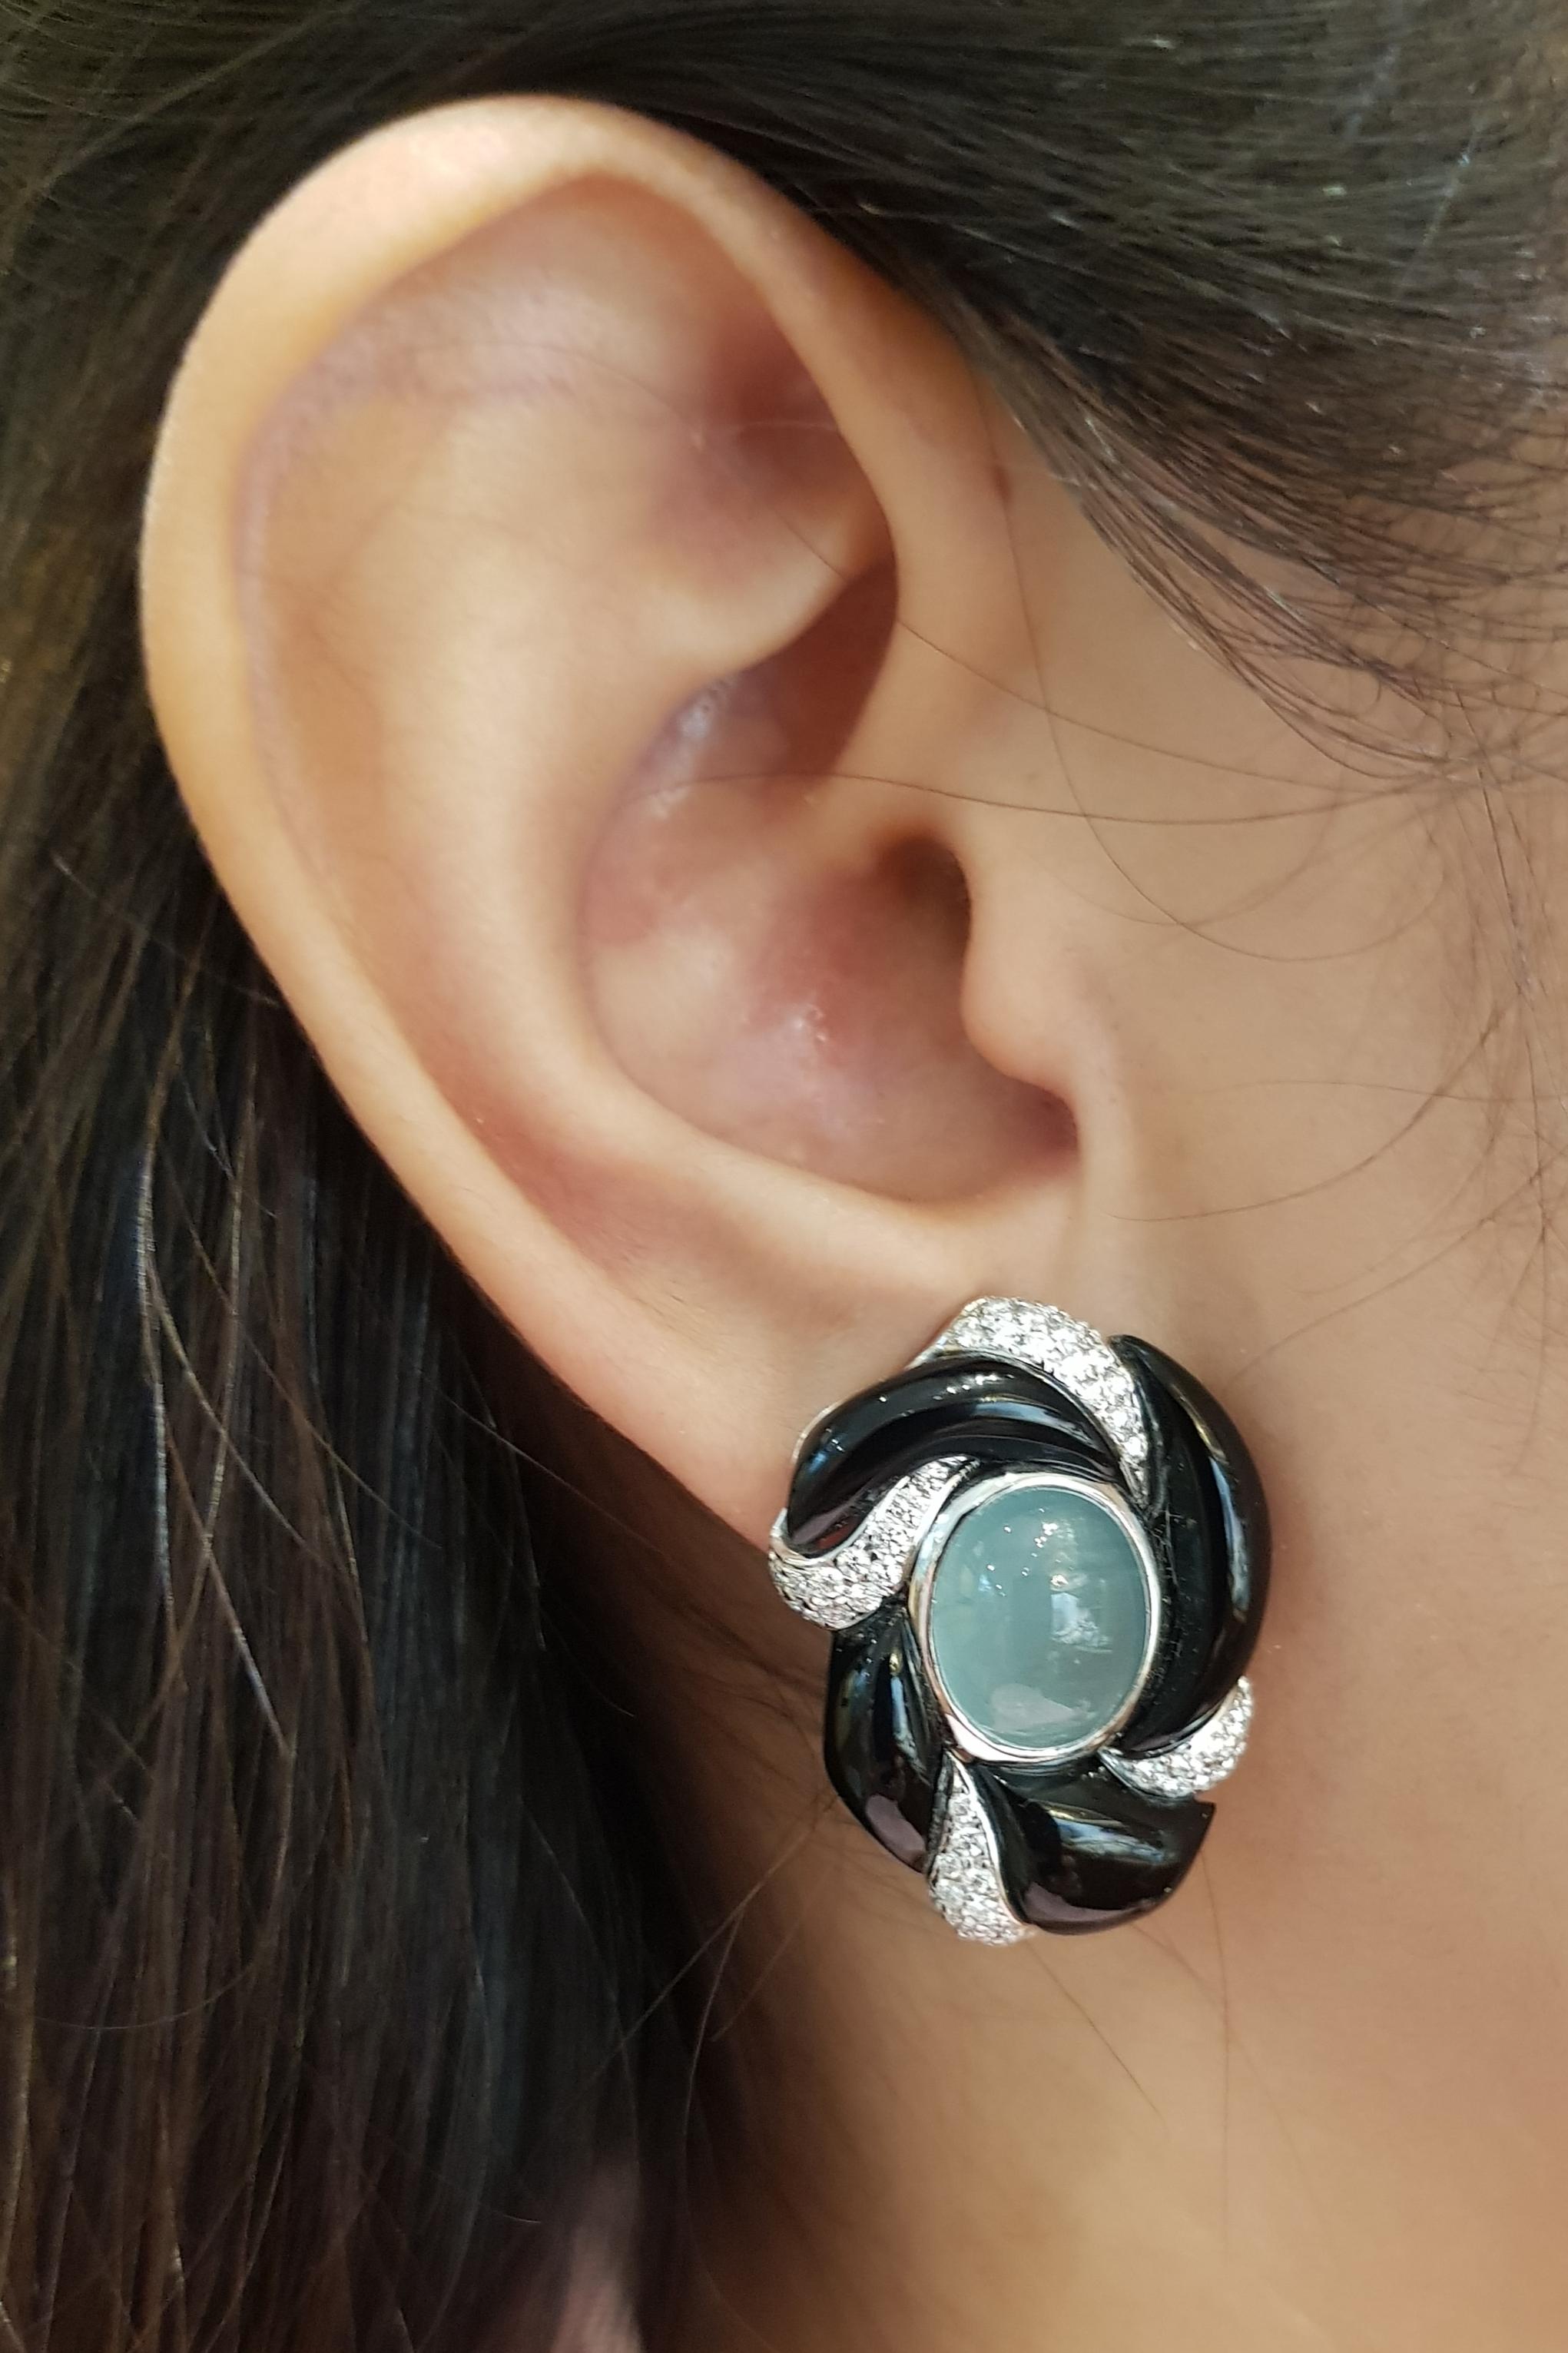 Cabochon Aquamarine 13.50 carats with Diamond 0.89 carat Earrings set in 18 Karat White Gold Settings

Width:  2.2 cm 
Length:  3.9 cm
Total Weight: 20.11 grams

